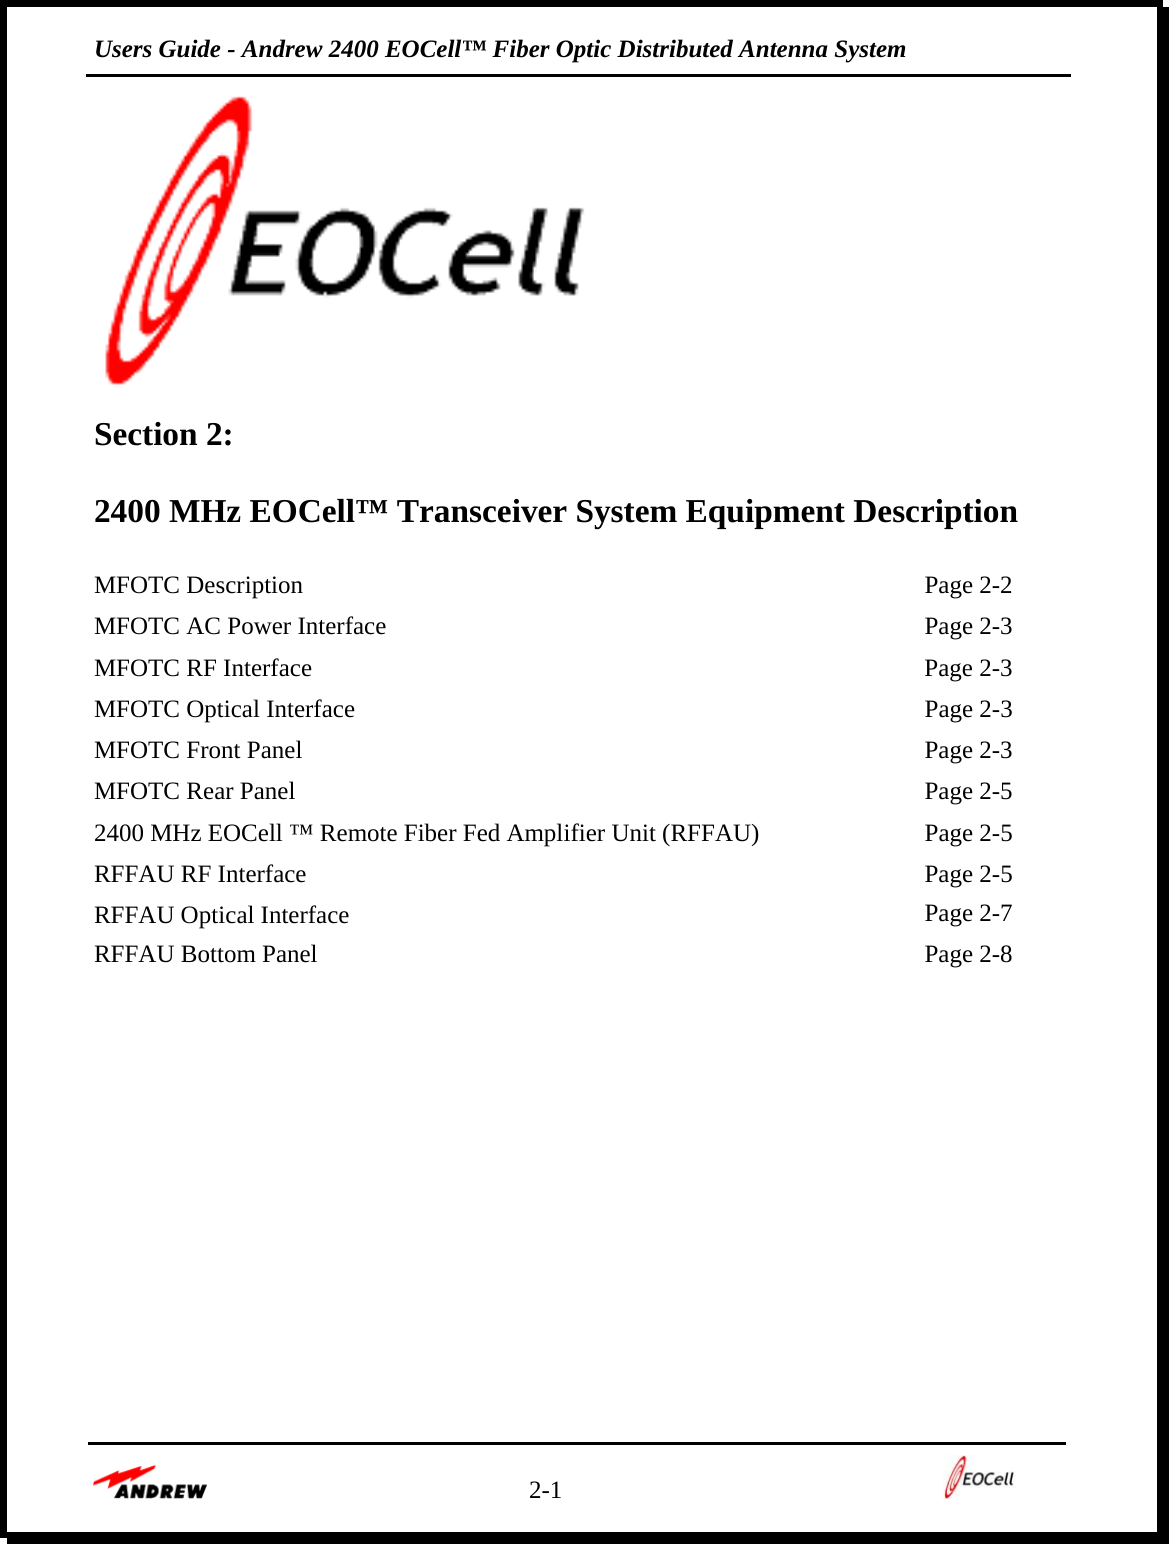 Users Guide - Andrew 2400 EOCell™ Fiber Optic Distributed Antenna System    2-1     Section 2:   2400 MHz EOCell™ Transceiver System Equipment Description  MFOTC Description    Page 2-2 MFOTC AC Power Interface    Page 2-3 MFOTC RF Interface    Page 2-3 MFOTC Optical Interface    Page 2-3 MFOTC Front Panel    Page 2-3 MFOTC Rear Panel    Page 2-5 2400 MHz EOCell ™ Remote Fiber Fed Amplifier Unit (RFFAU)    Page 2-5 RFFAU RF Interface    Page 2-5 RFFAU Optical Interface   Page 2-7 RFFAU Bottom Panel    Page 2-8      